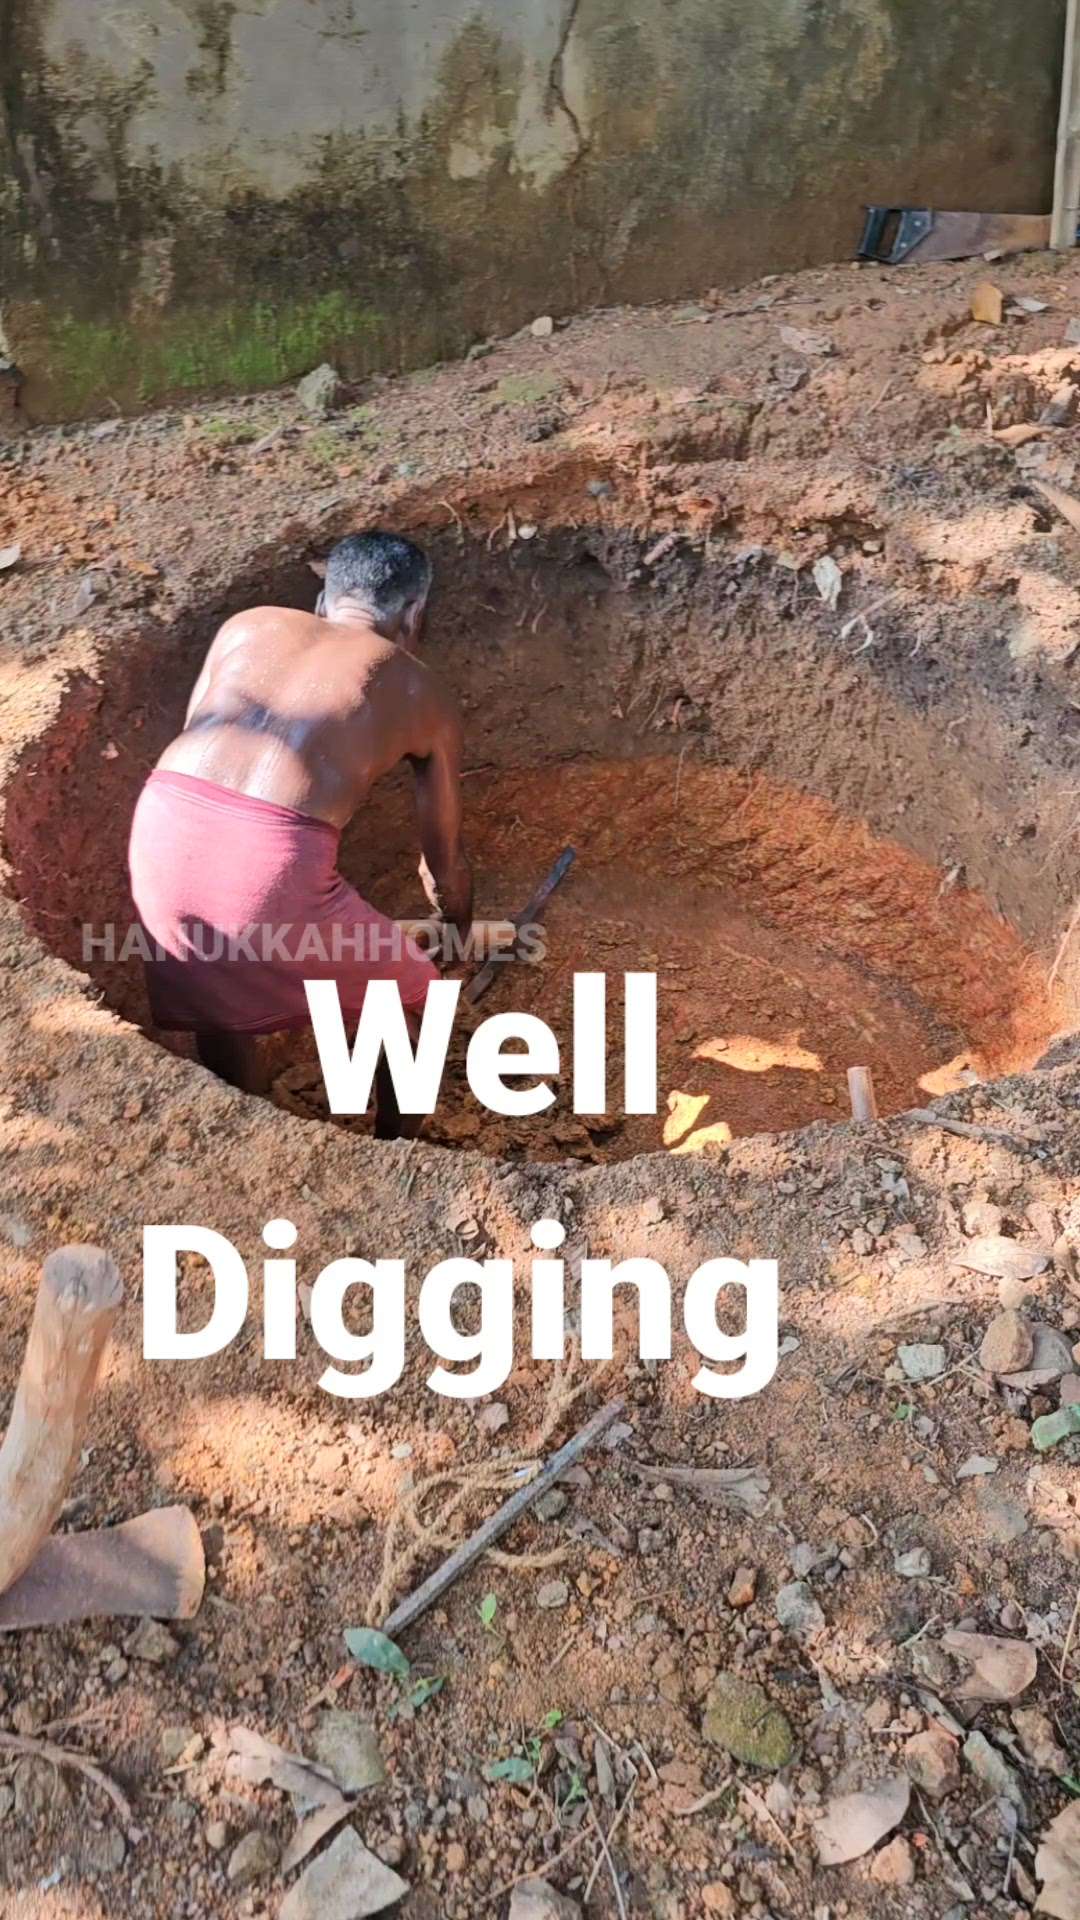 Three tips for Open well digging
#creatorsofkolo #Top3Tips #openwell #HouseConstruction #thiruvalla